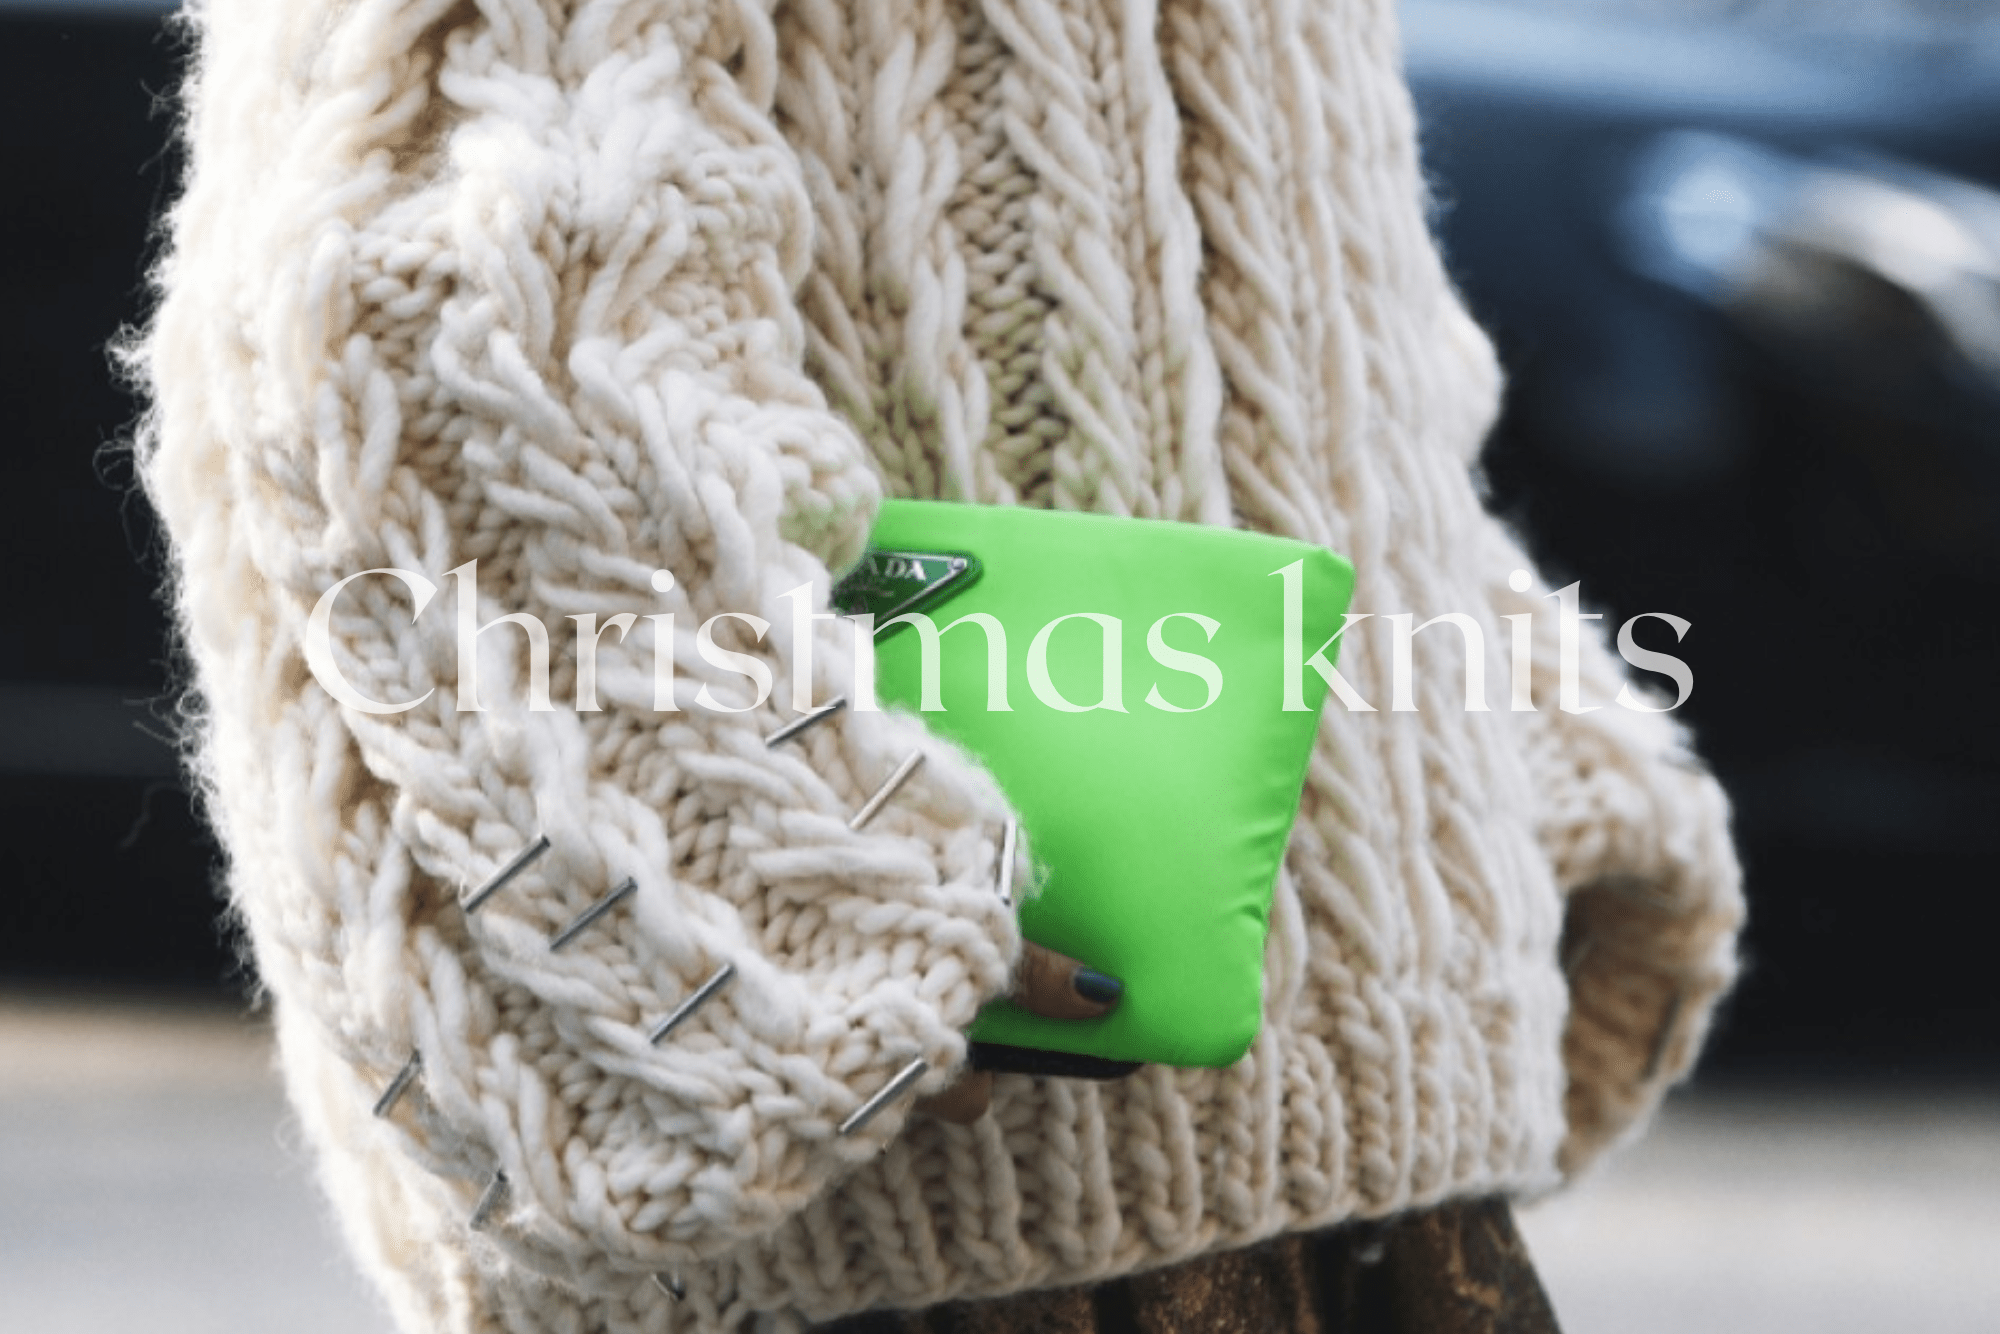 Christmas knits: The glam knits of the season